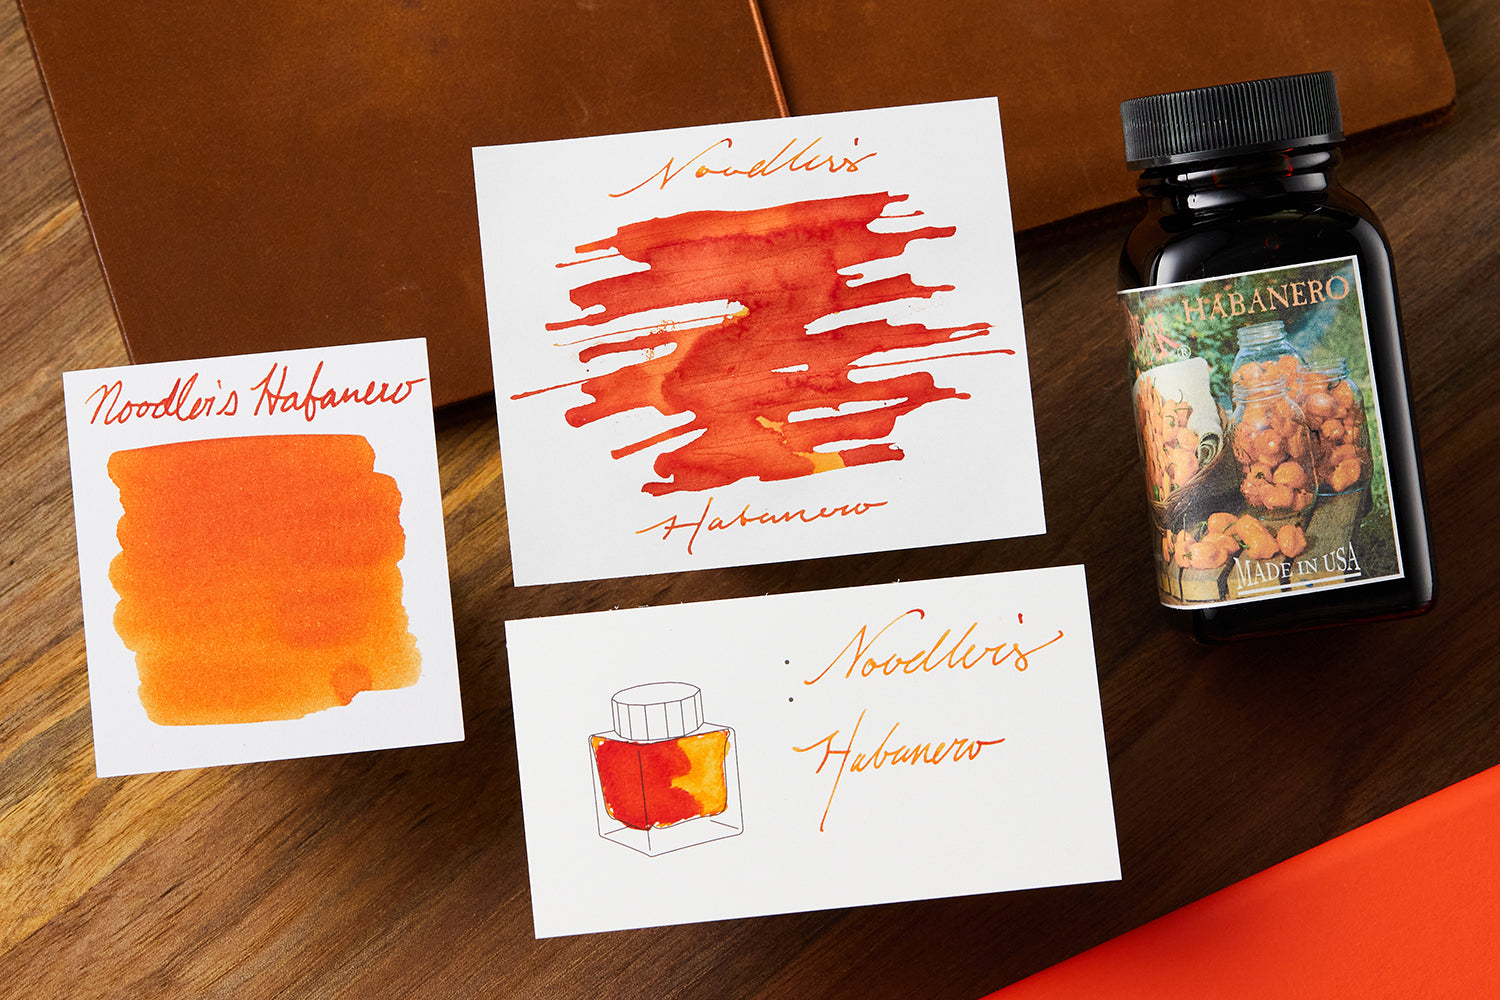 Noodler's Habanero ink of various papers